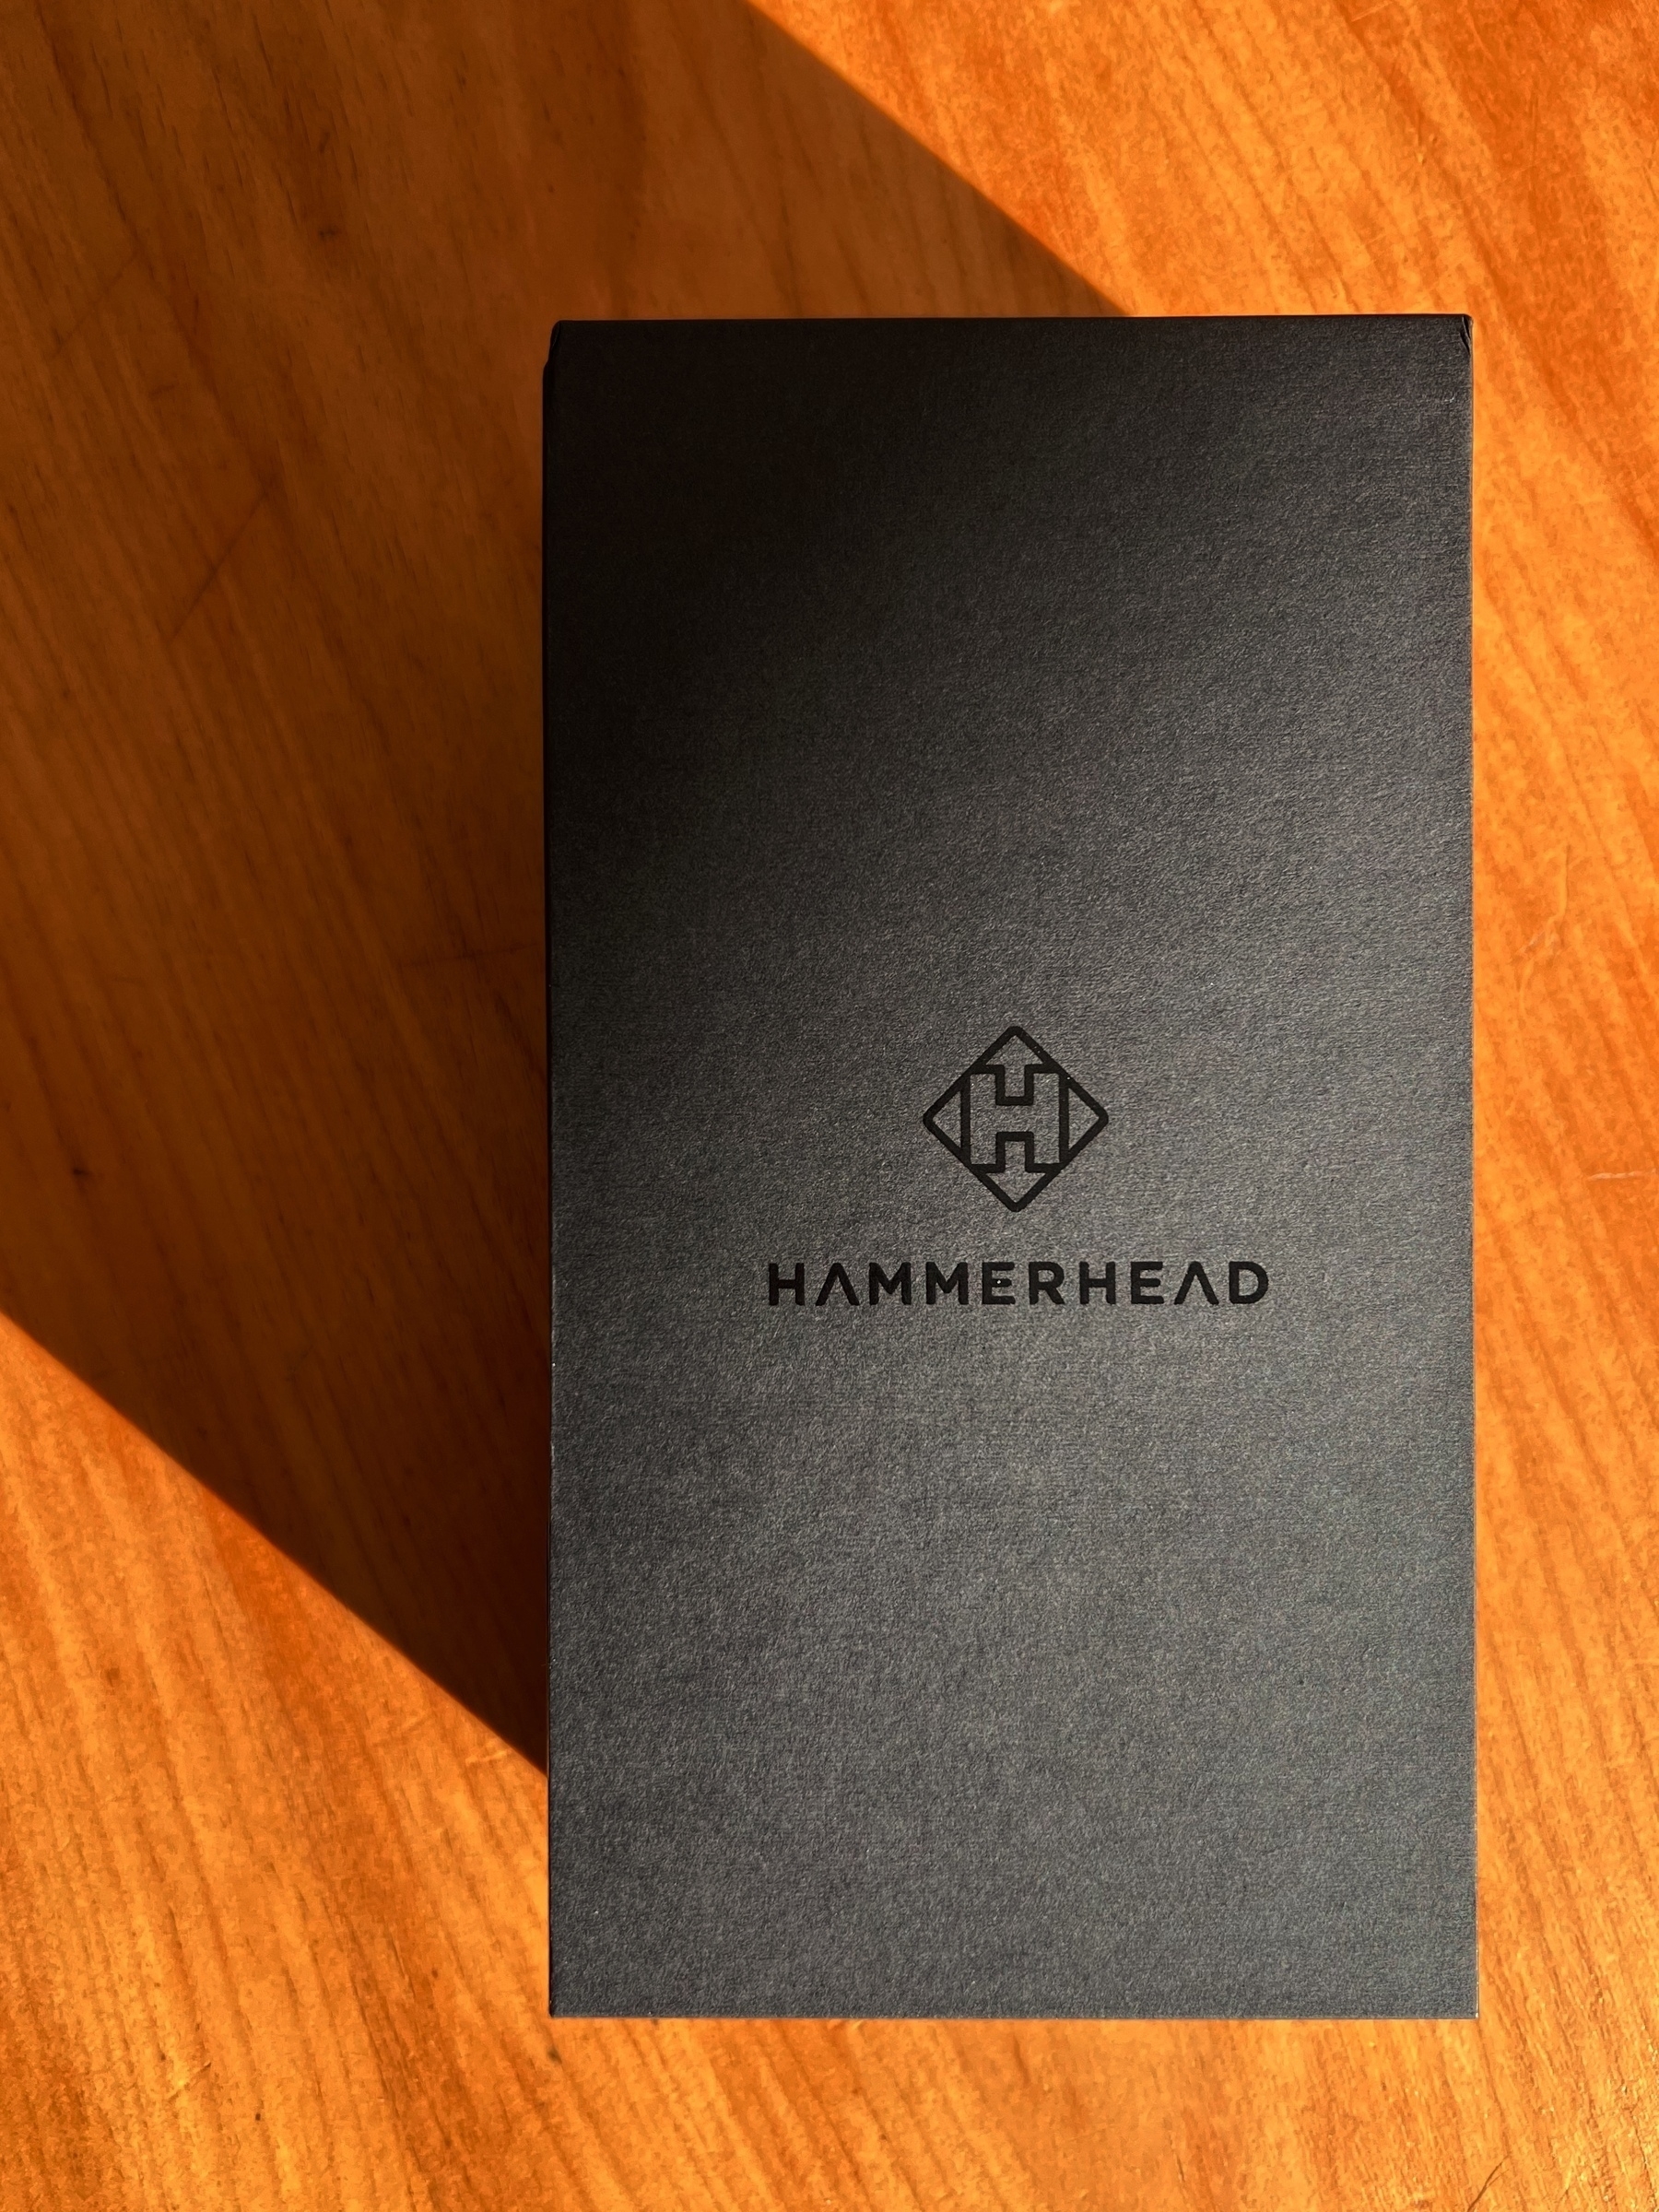 Rectangular paper packaging in matte black with a glossy ”Hammerhead“ brand name and logo in the middle sitting on top of a wooden table, sunlight harshly illuminating everthing from one side, casting a dark shadow to the left of the packaging.